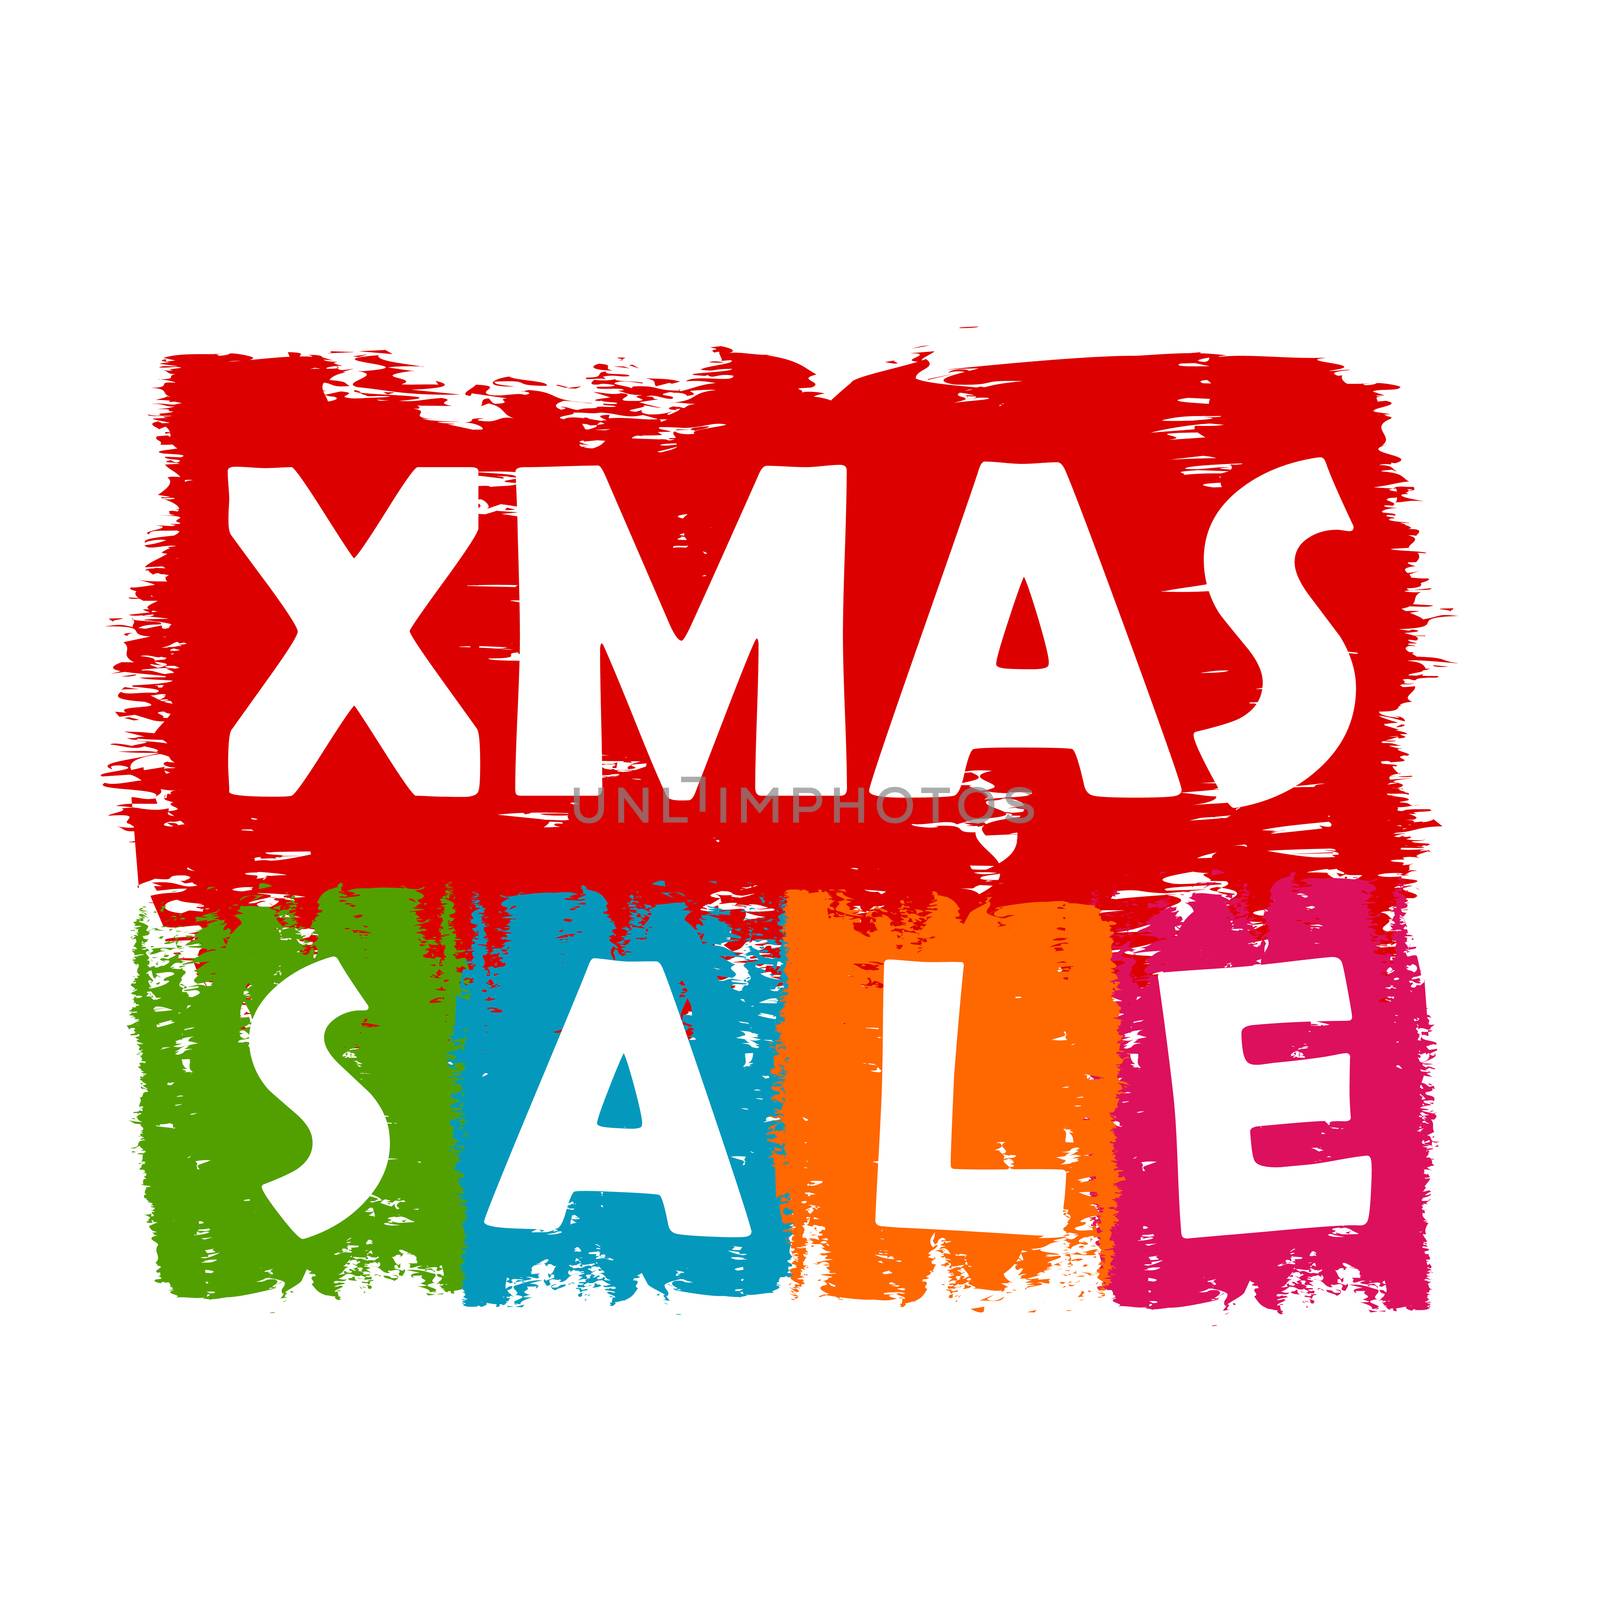 Xmas sale - colorful draw banner, business concept